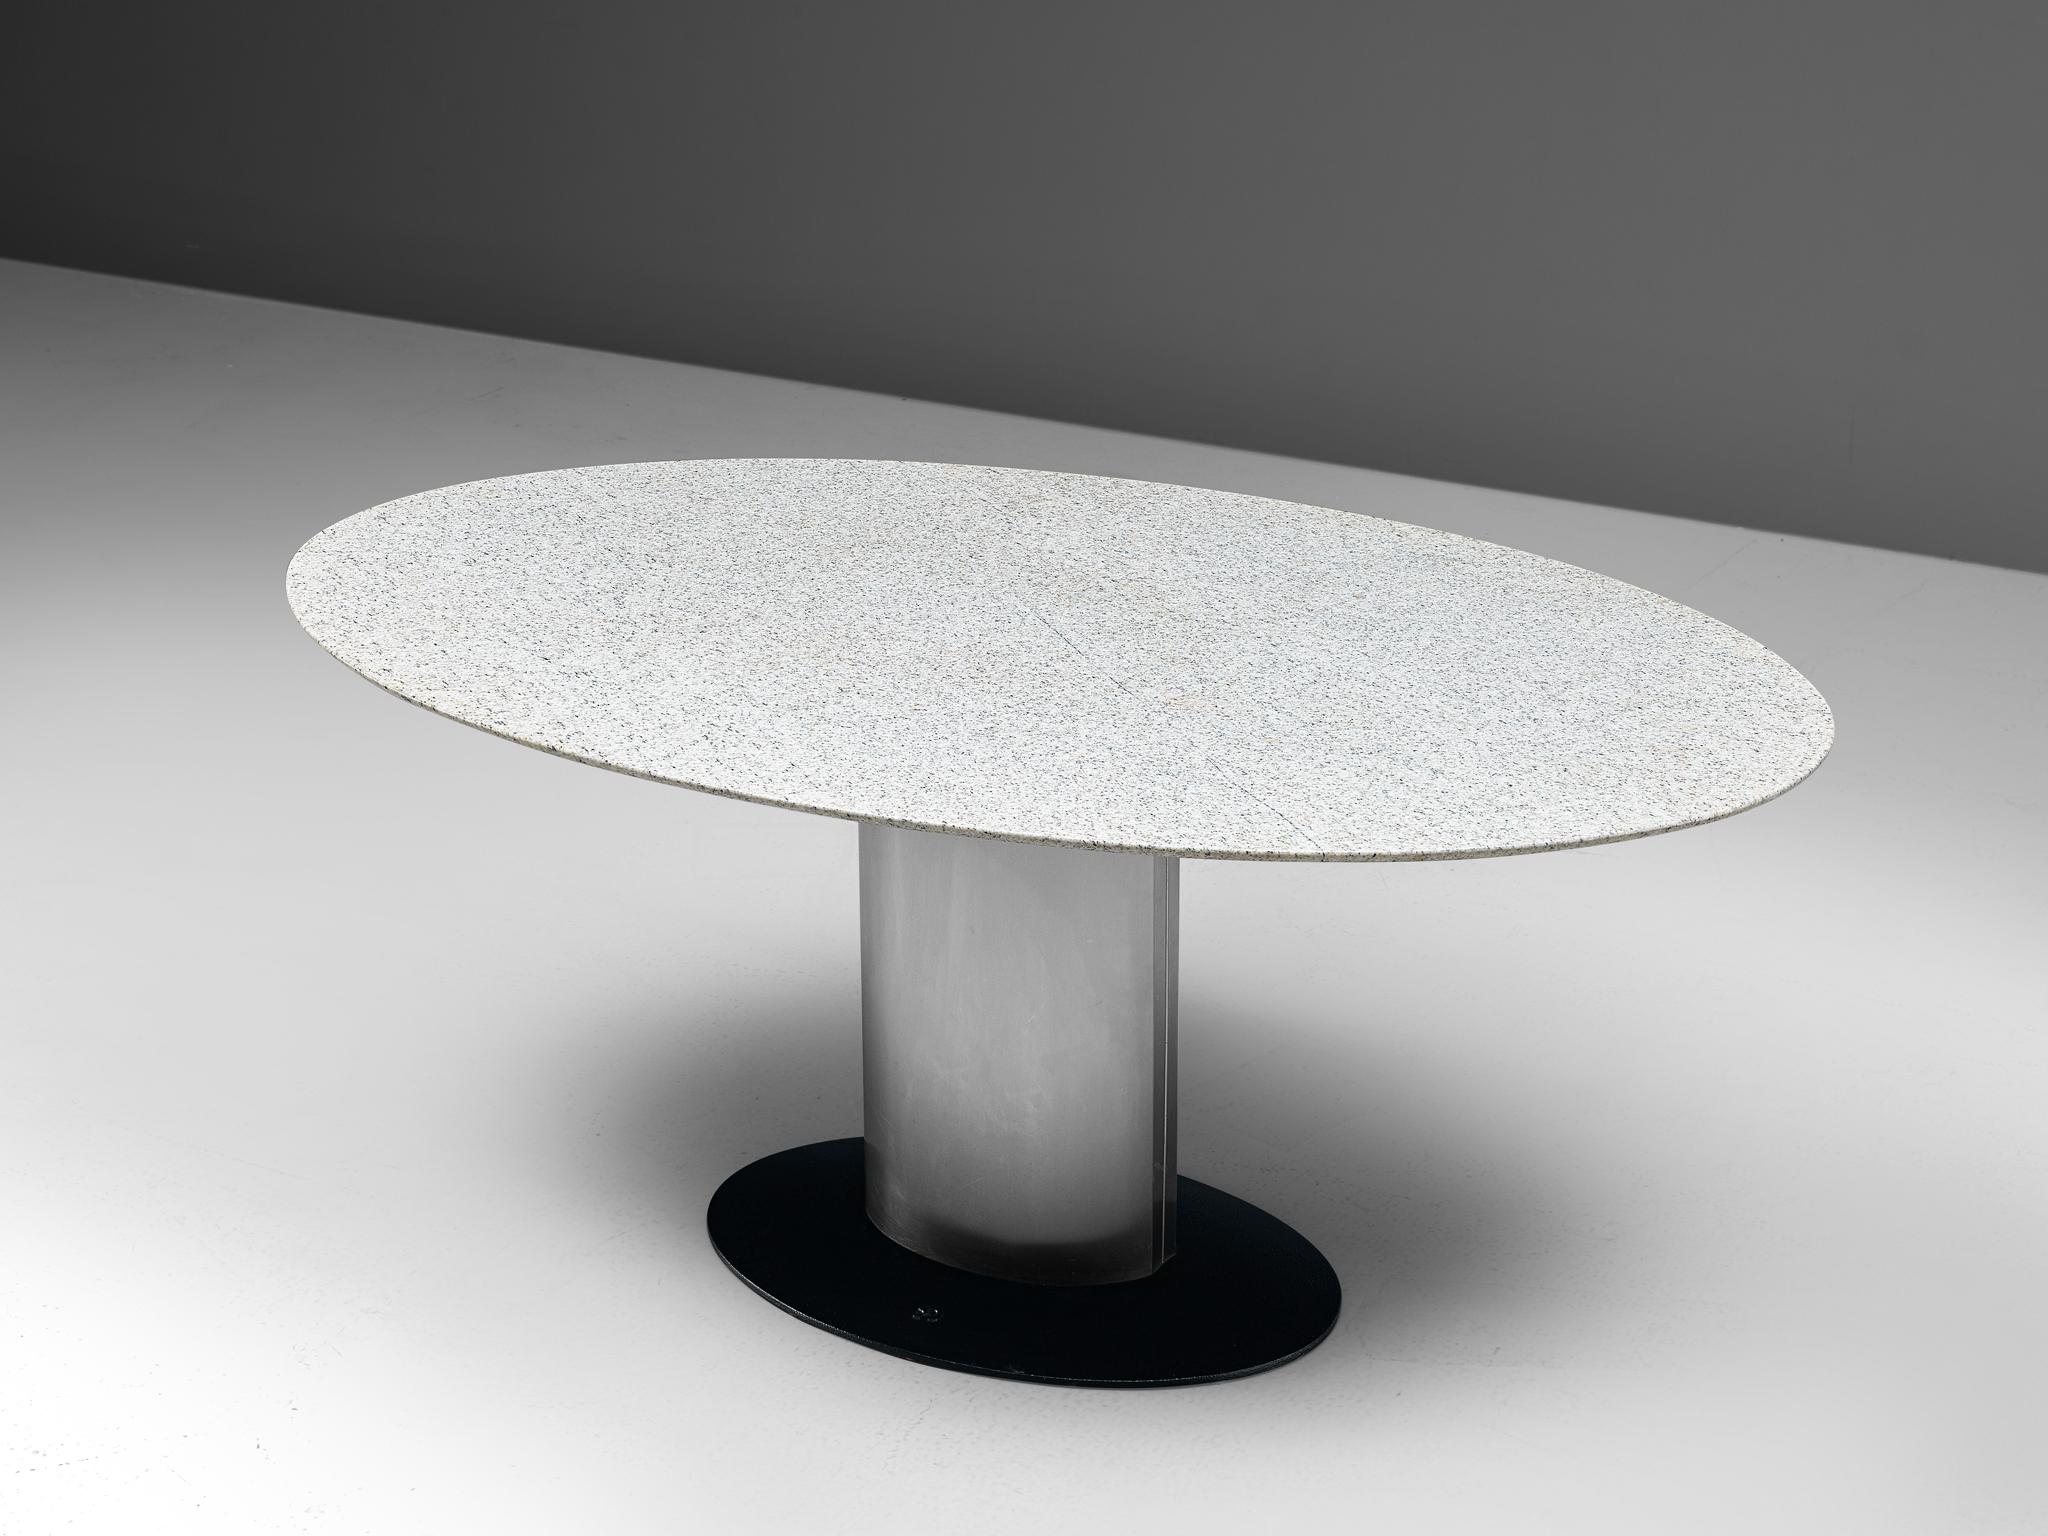 Peter Draenert, pedestal table, white granite, stainless steel, coated metal, Germany, 1970s

The construction of this table consists of solely oval shapes. An asymmetrical composition is created by means of layering these differently sized forms